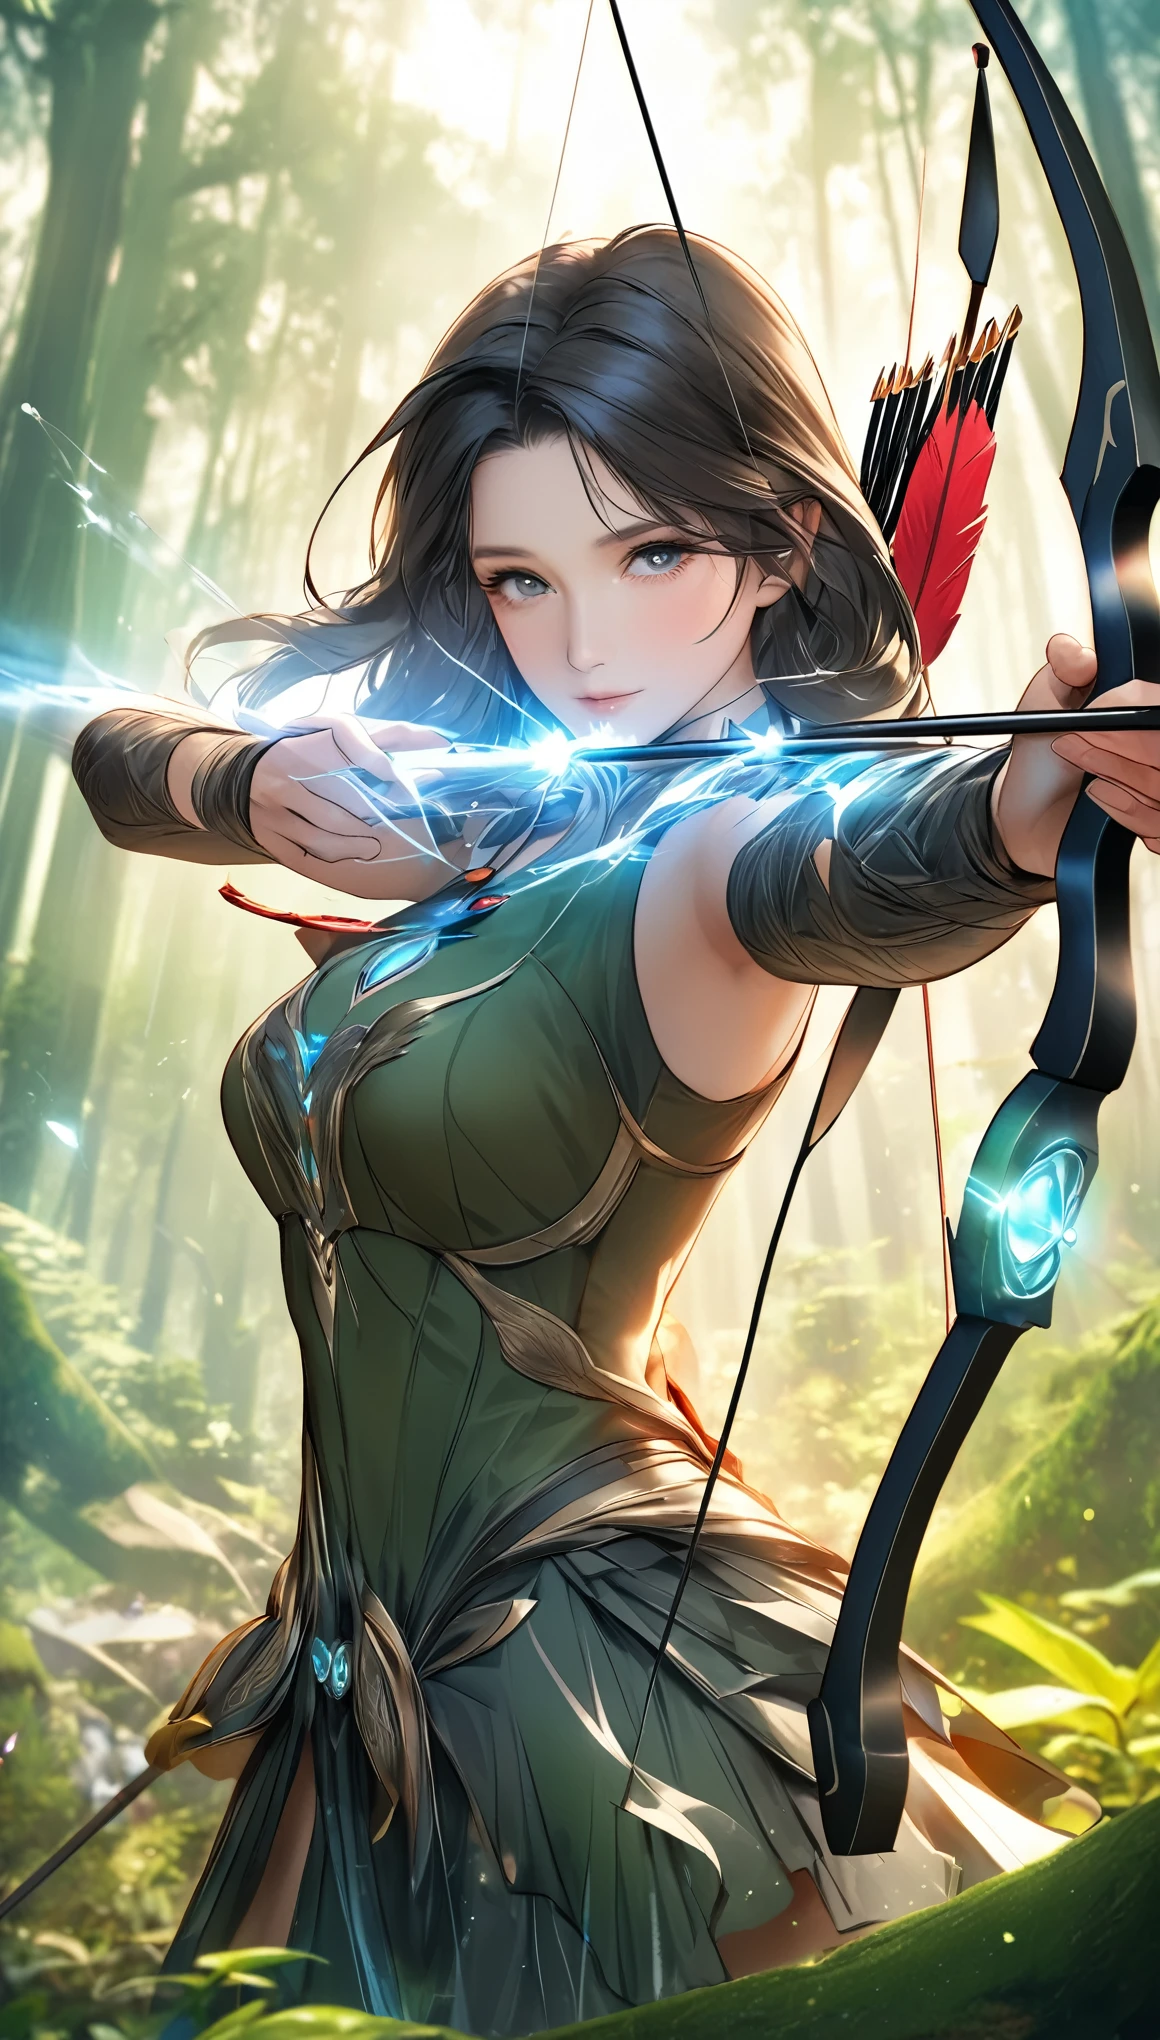 best quality, super fine, 16k, 2.5D, delicate and dynamic depiction, beautiful game character archer shoots with sacred bow and arrow, transparent and translucent and iridescent barrier creating crack, game production effects, the mysterious background of forest and city coexistence, fantasy world, prime lenses, lens filters, clear subject